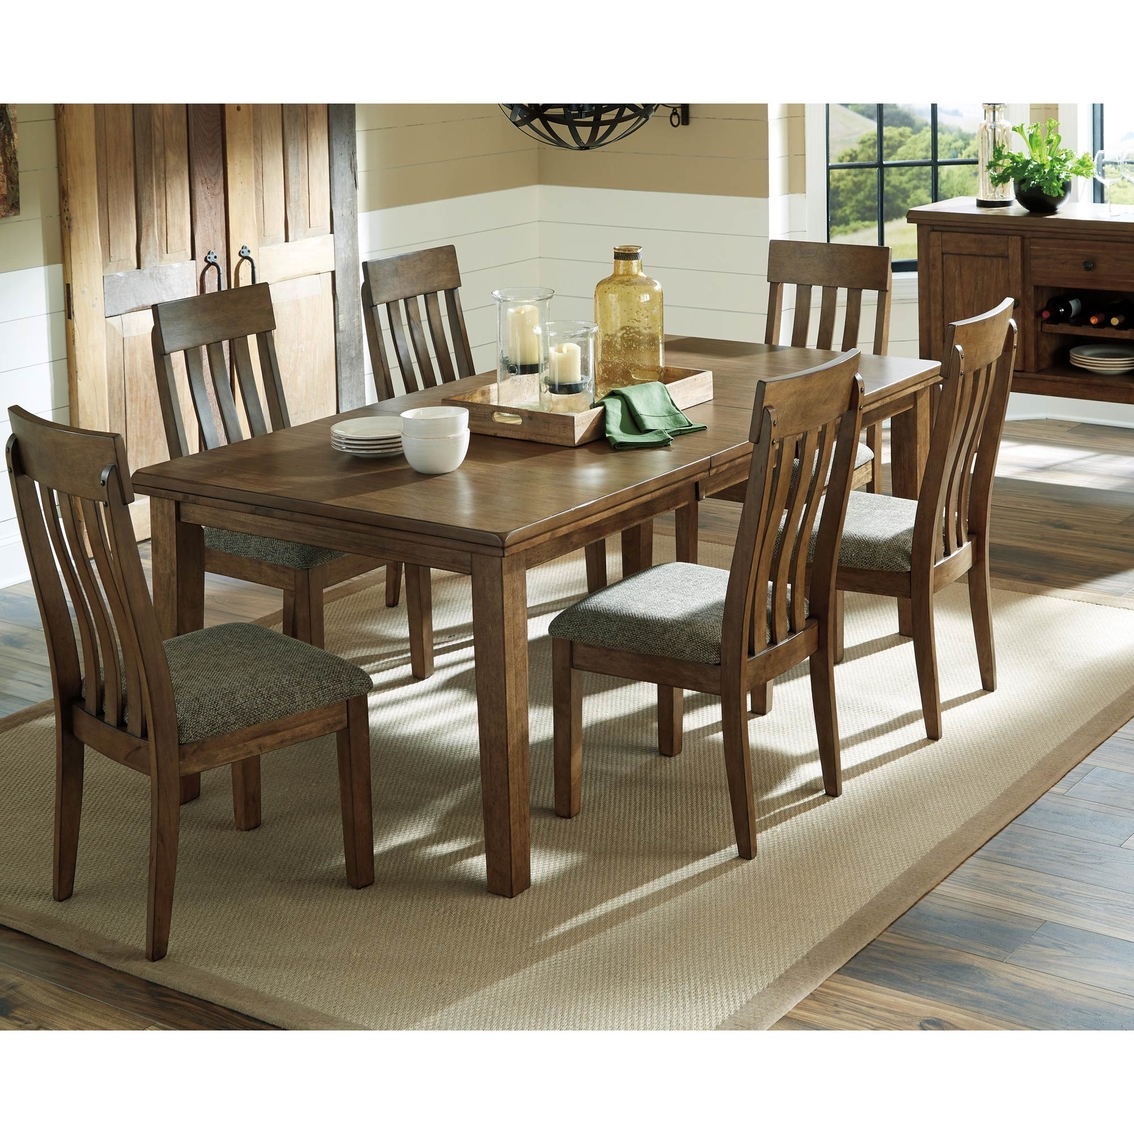 Benchcraft Flaybern 7 pc. Dining Set - Image 3 of 3